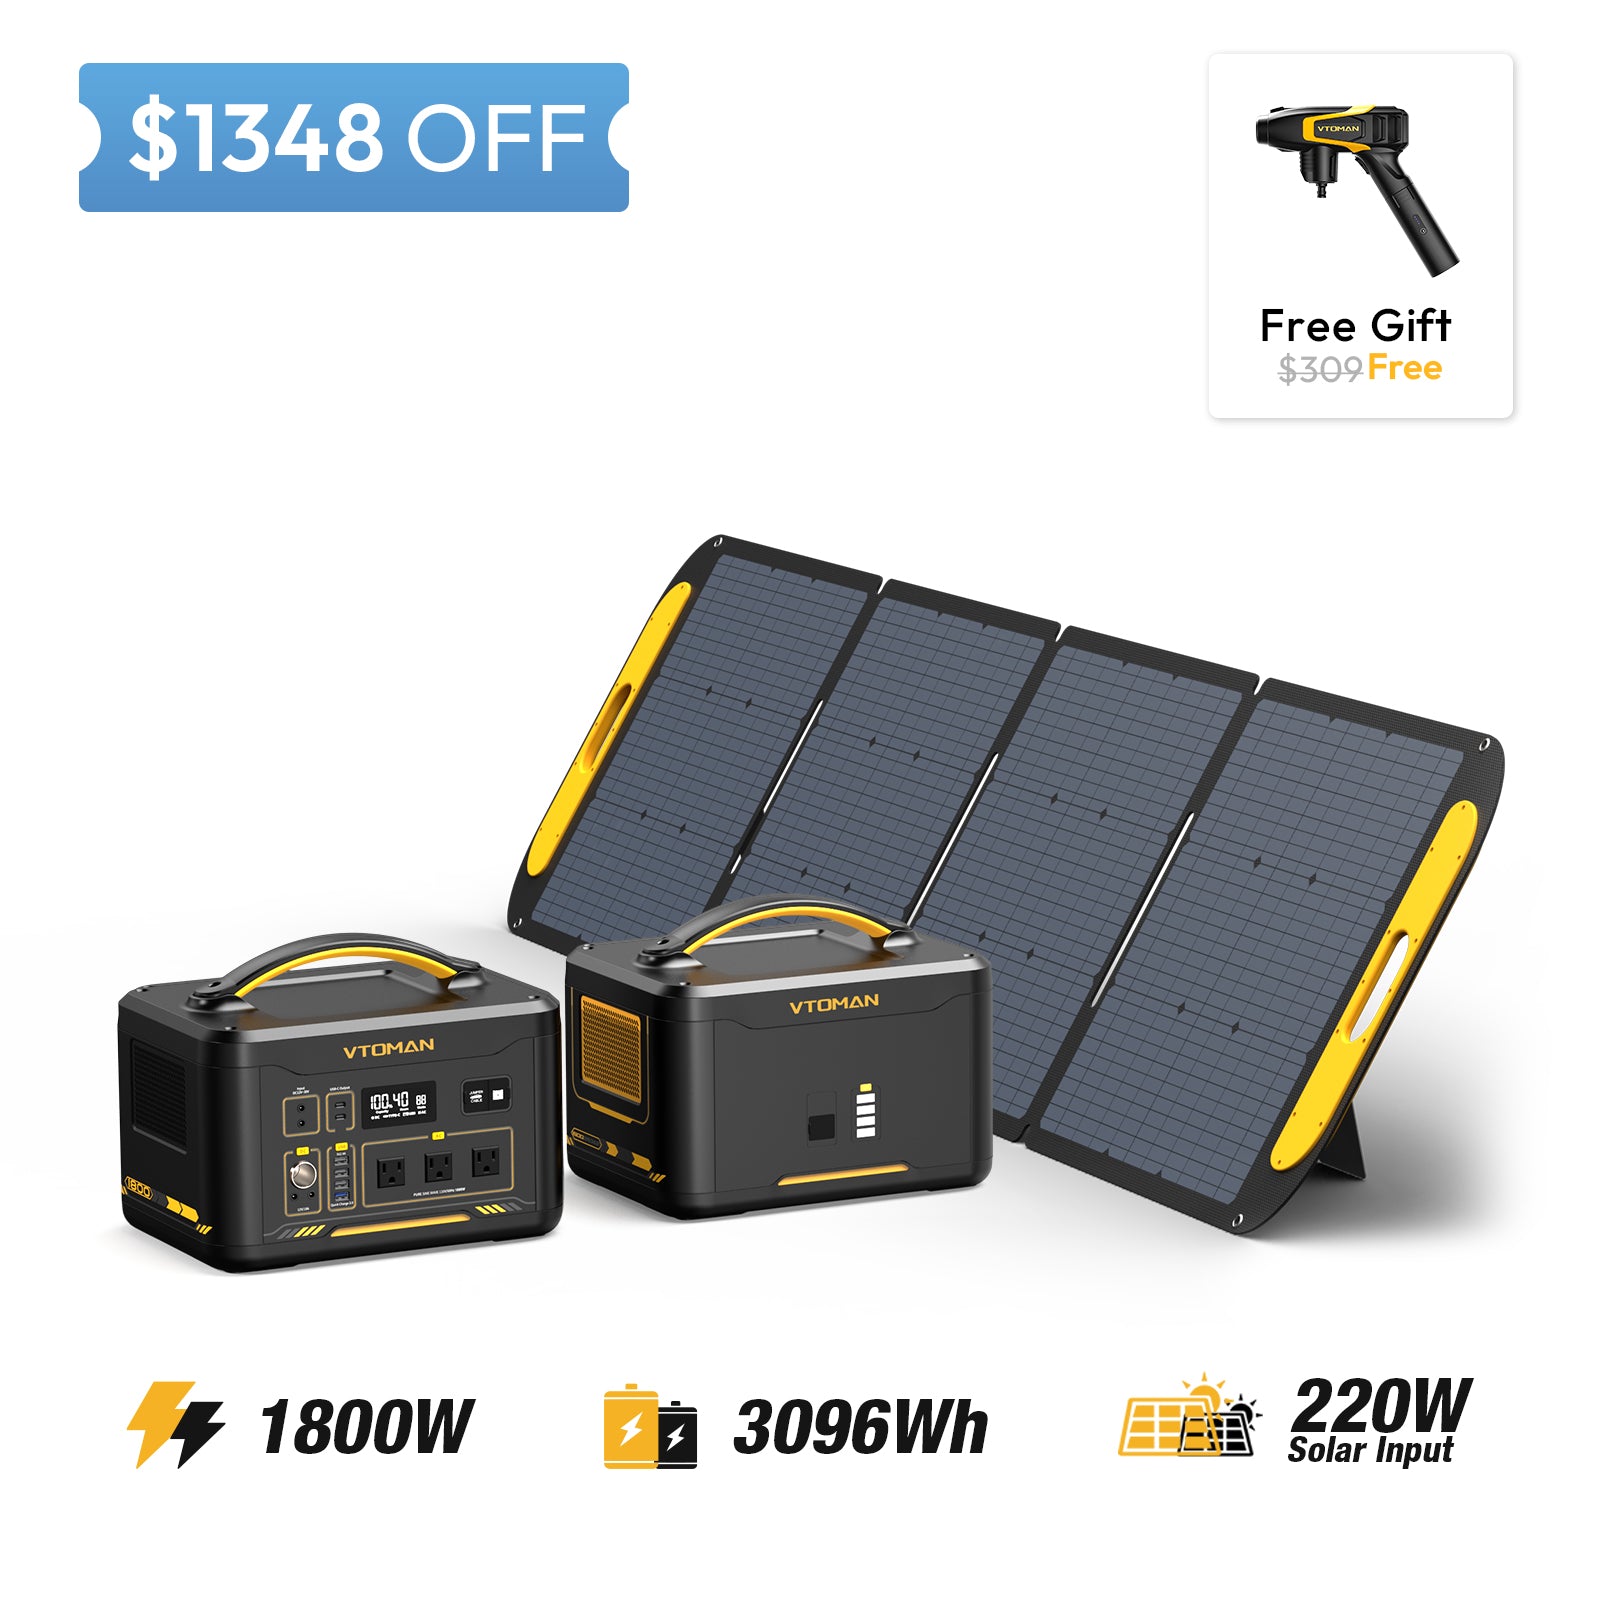 Jump 1800-1548Wh extra battery-220W solar panel save $1348 in summer sale